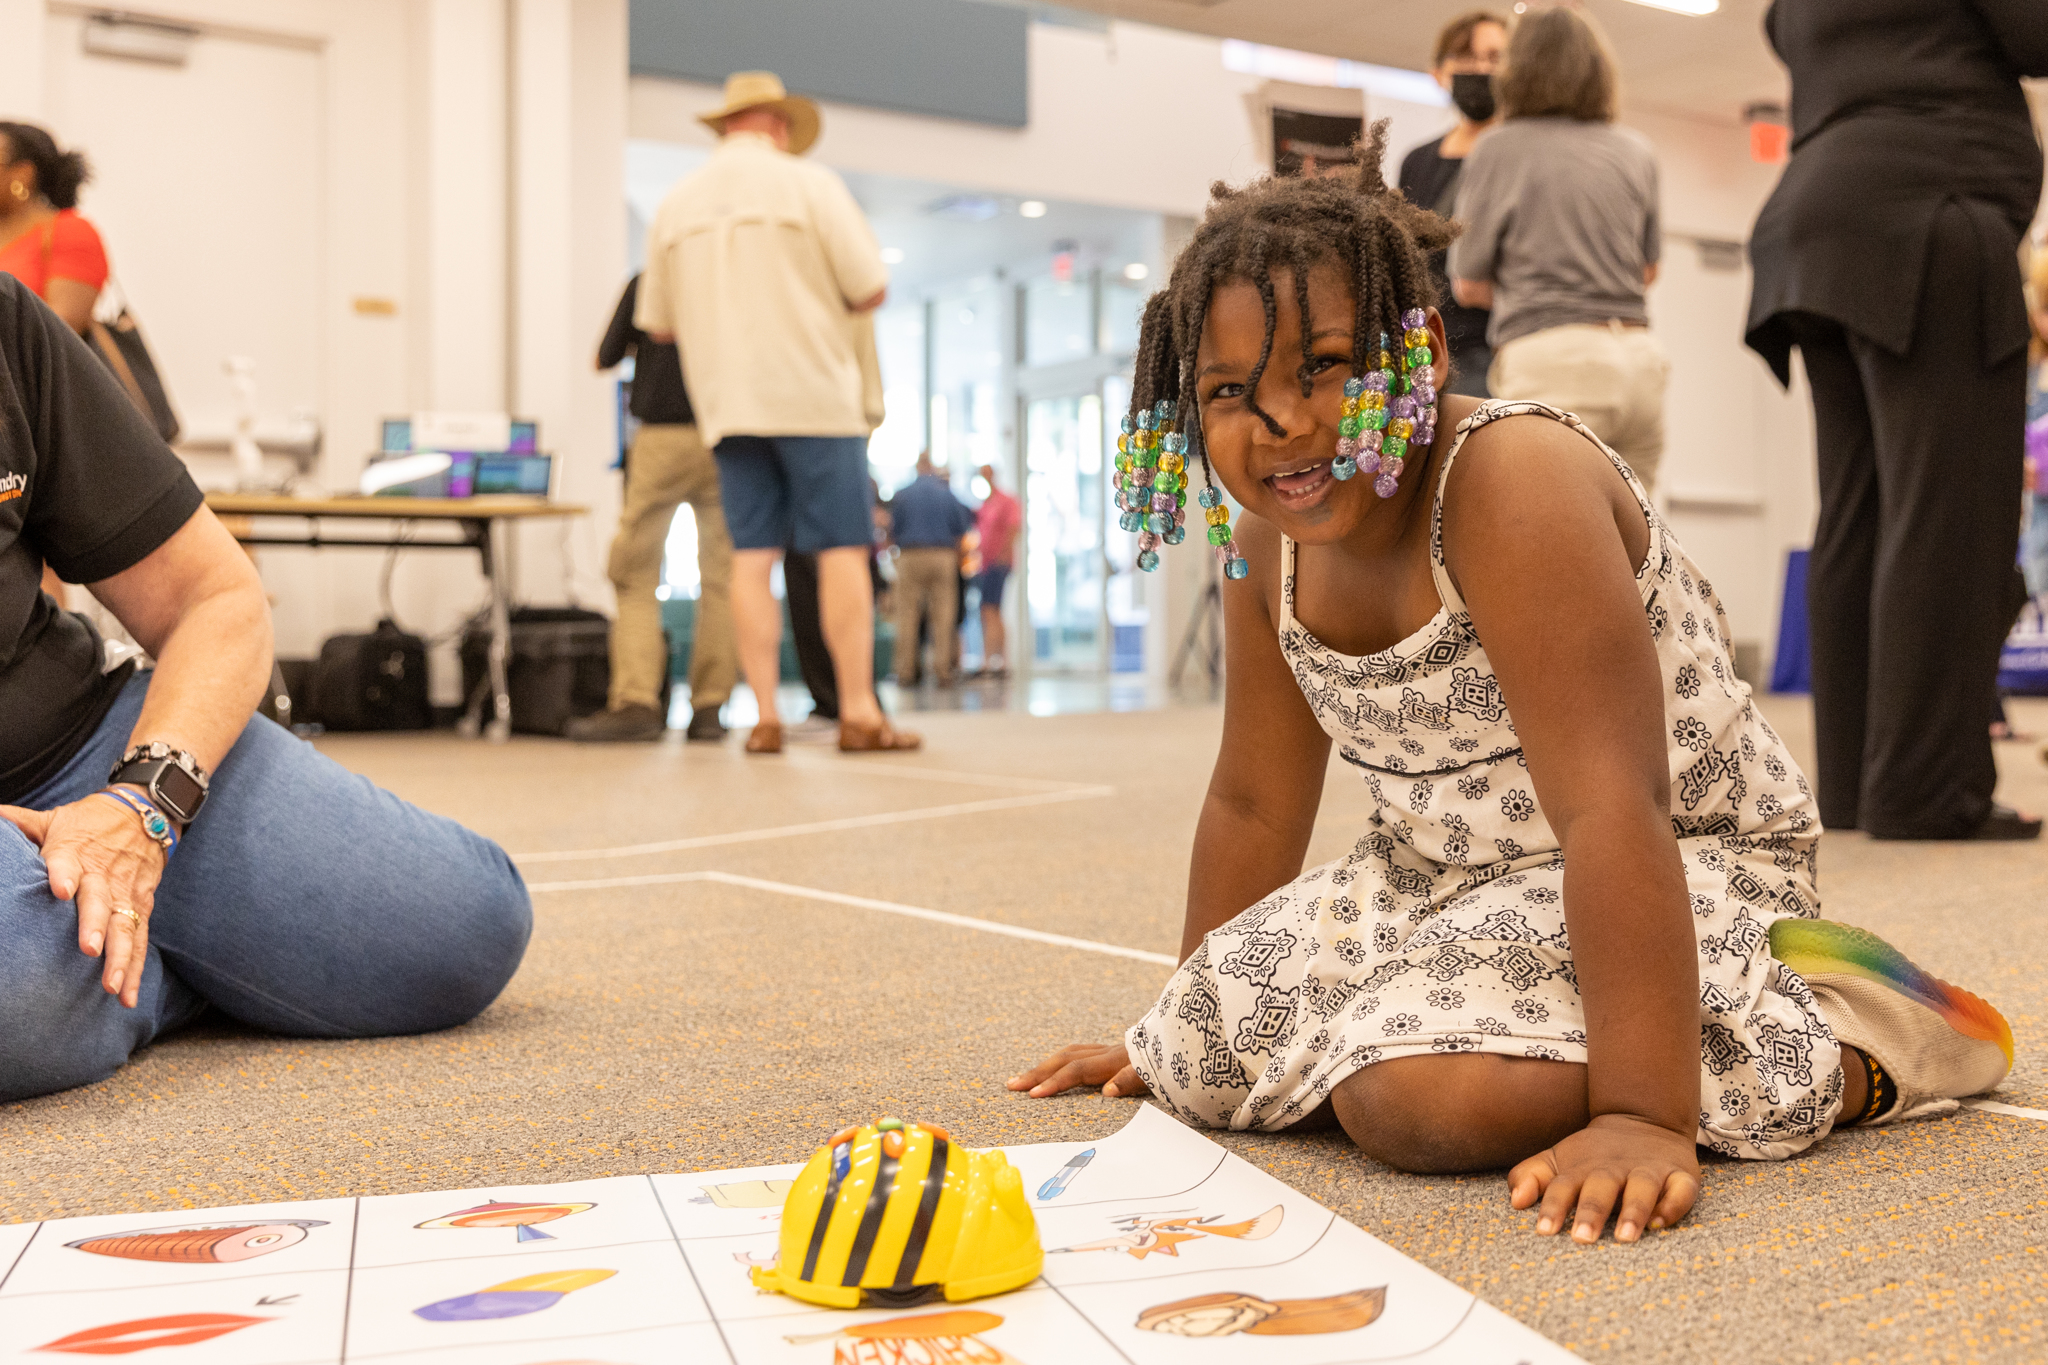 One of our younger attendees at our Open House event, sitting on the floor playing with a robotics toy